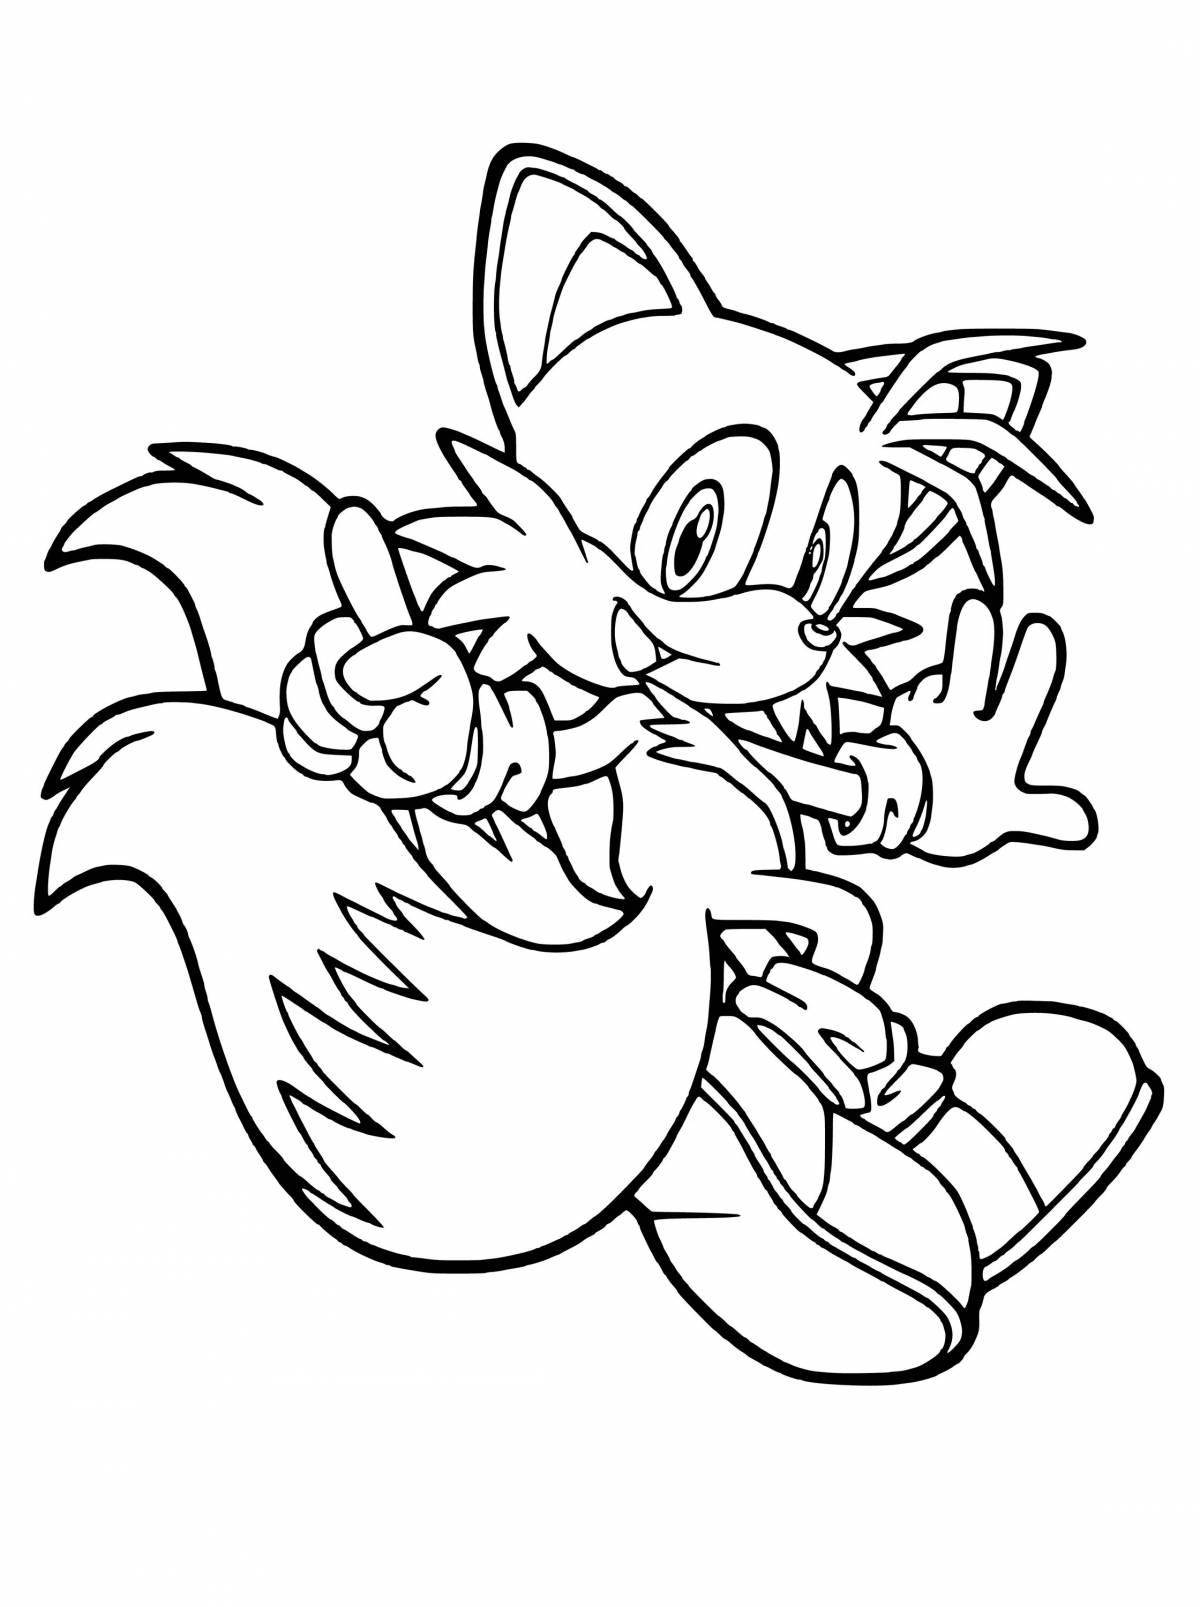 Majestic sonic coloring page